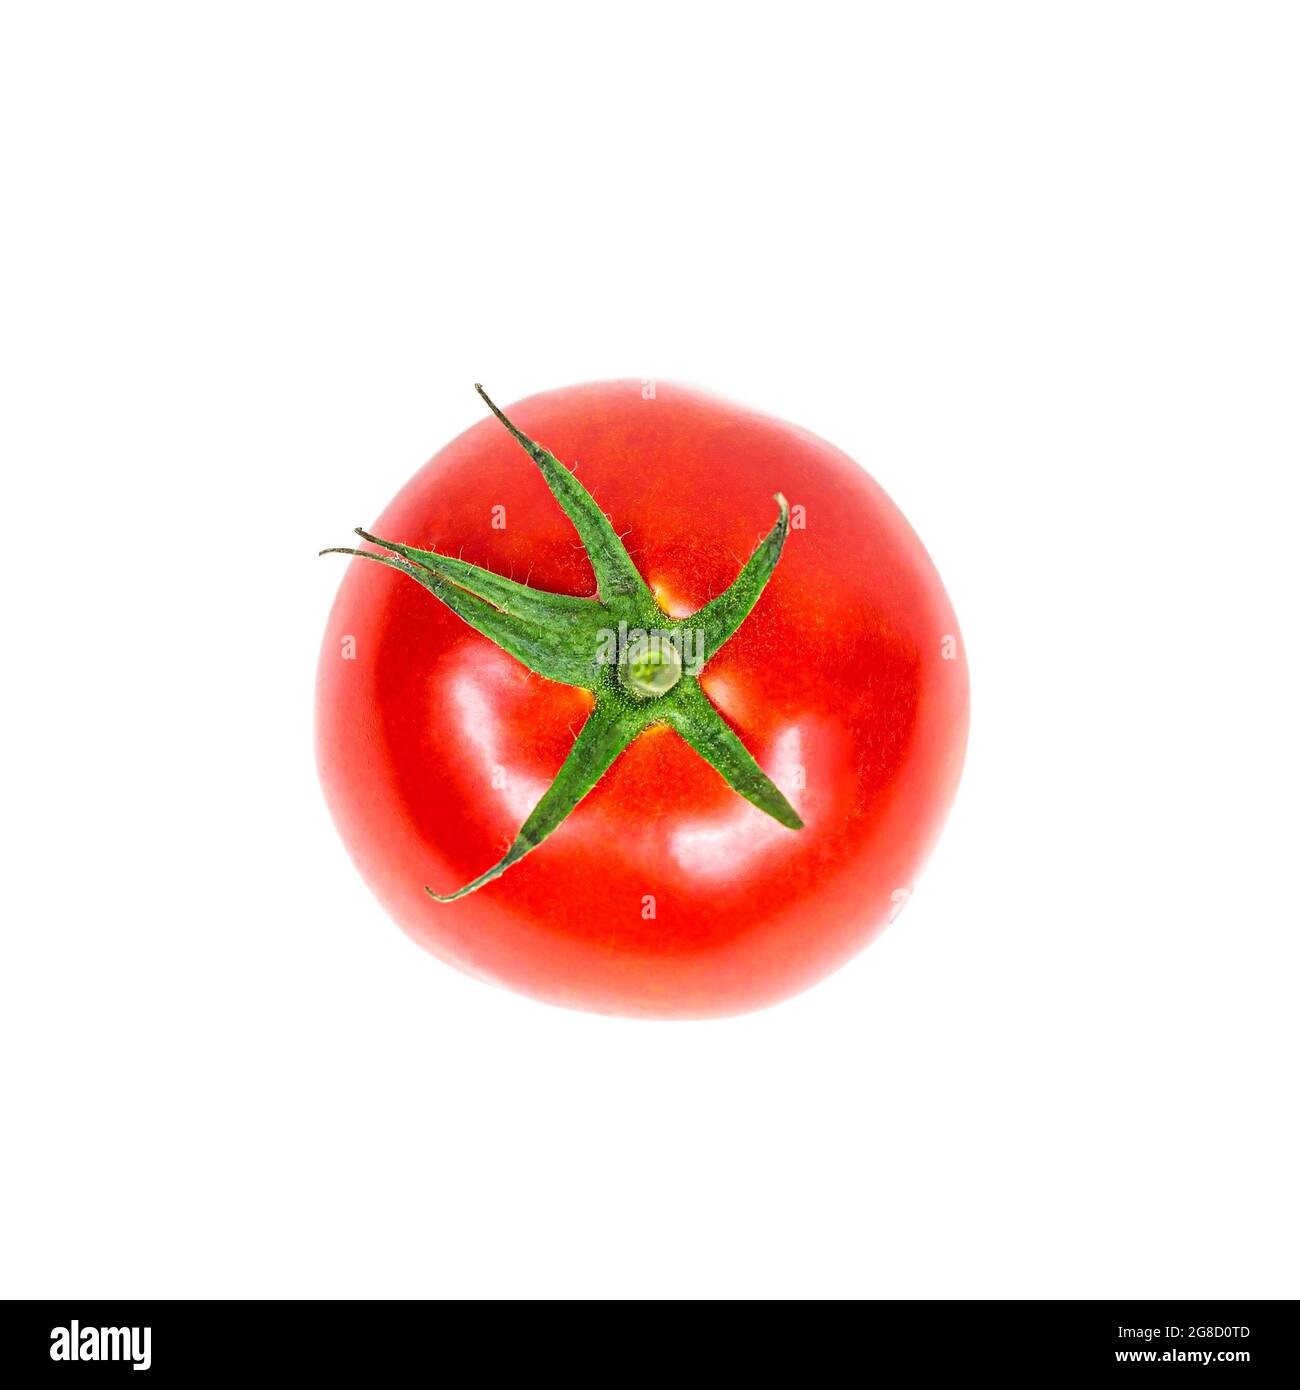 Top view of fresh whole tomato isolated on white background. Stock Photo